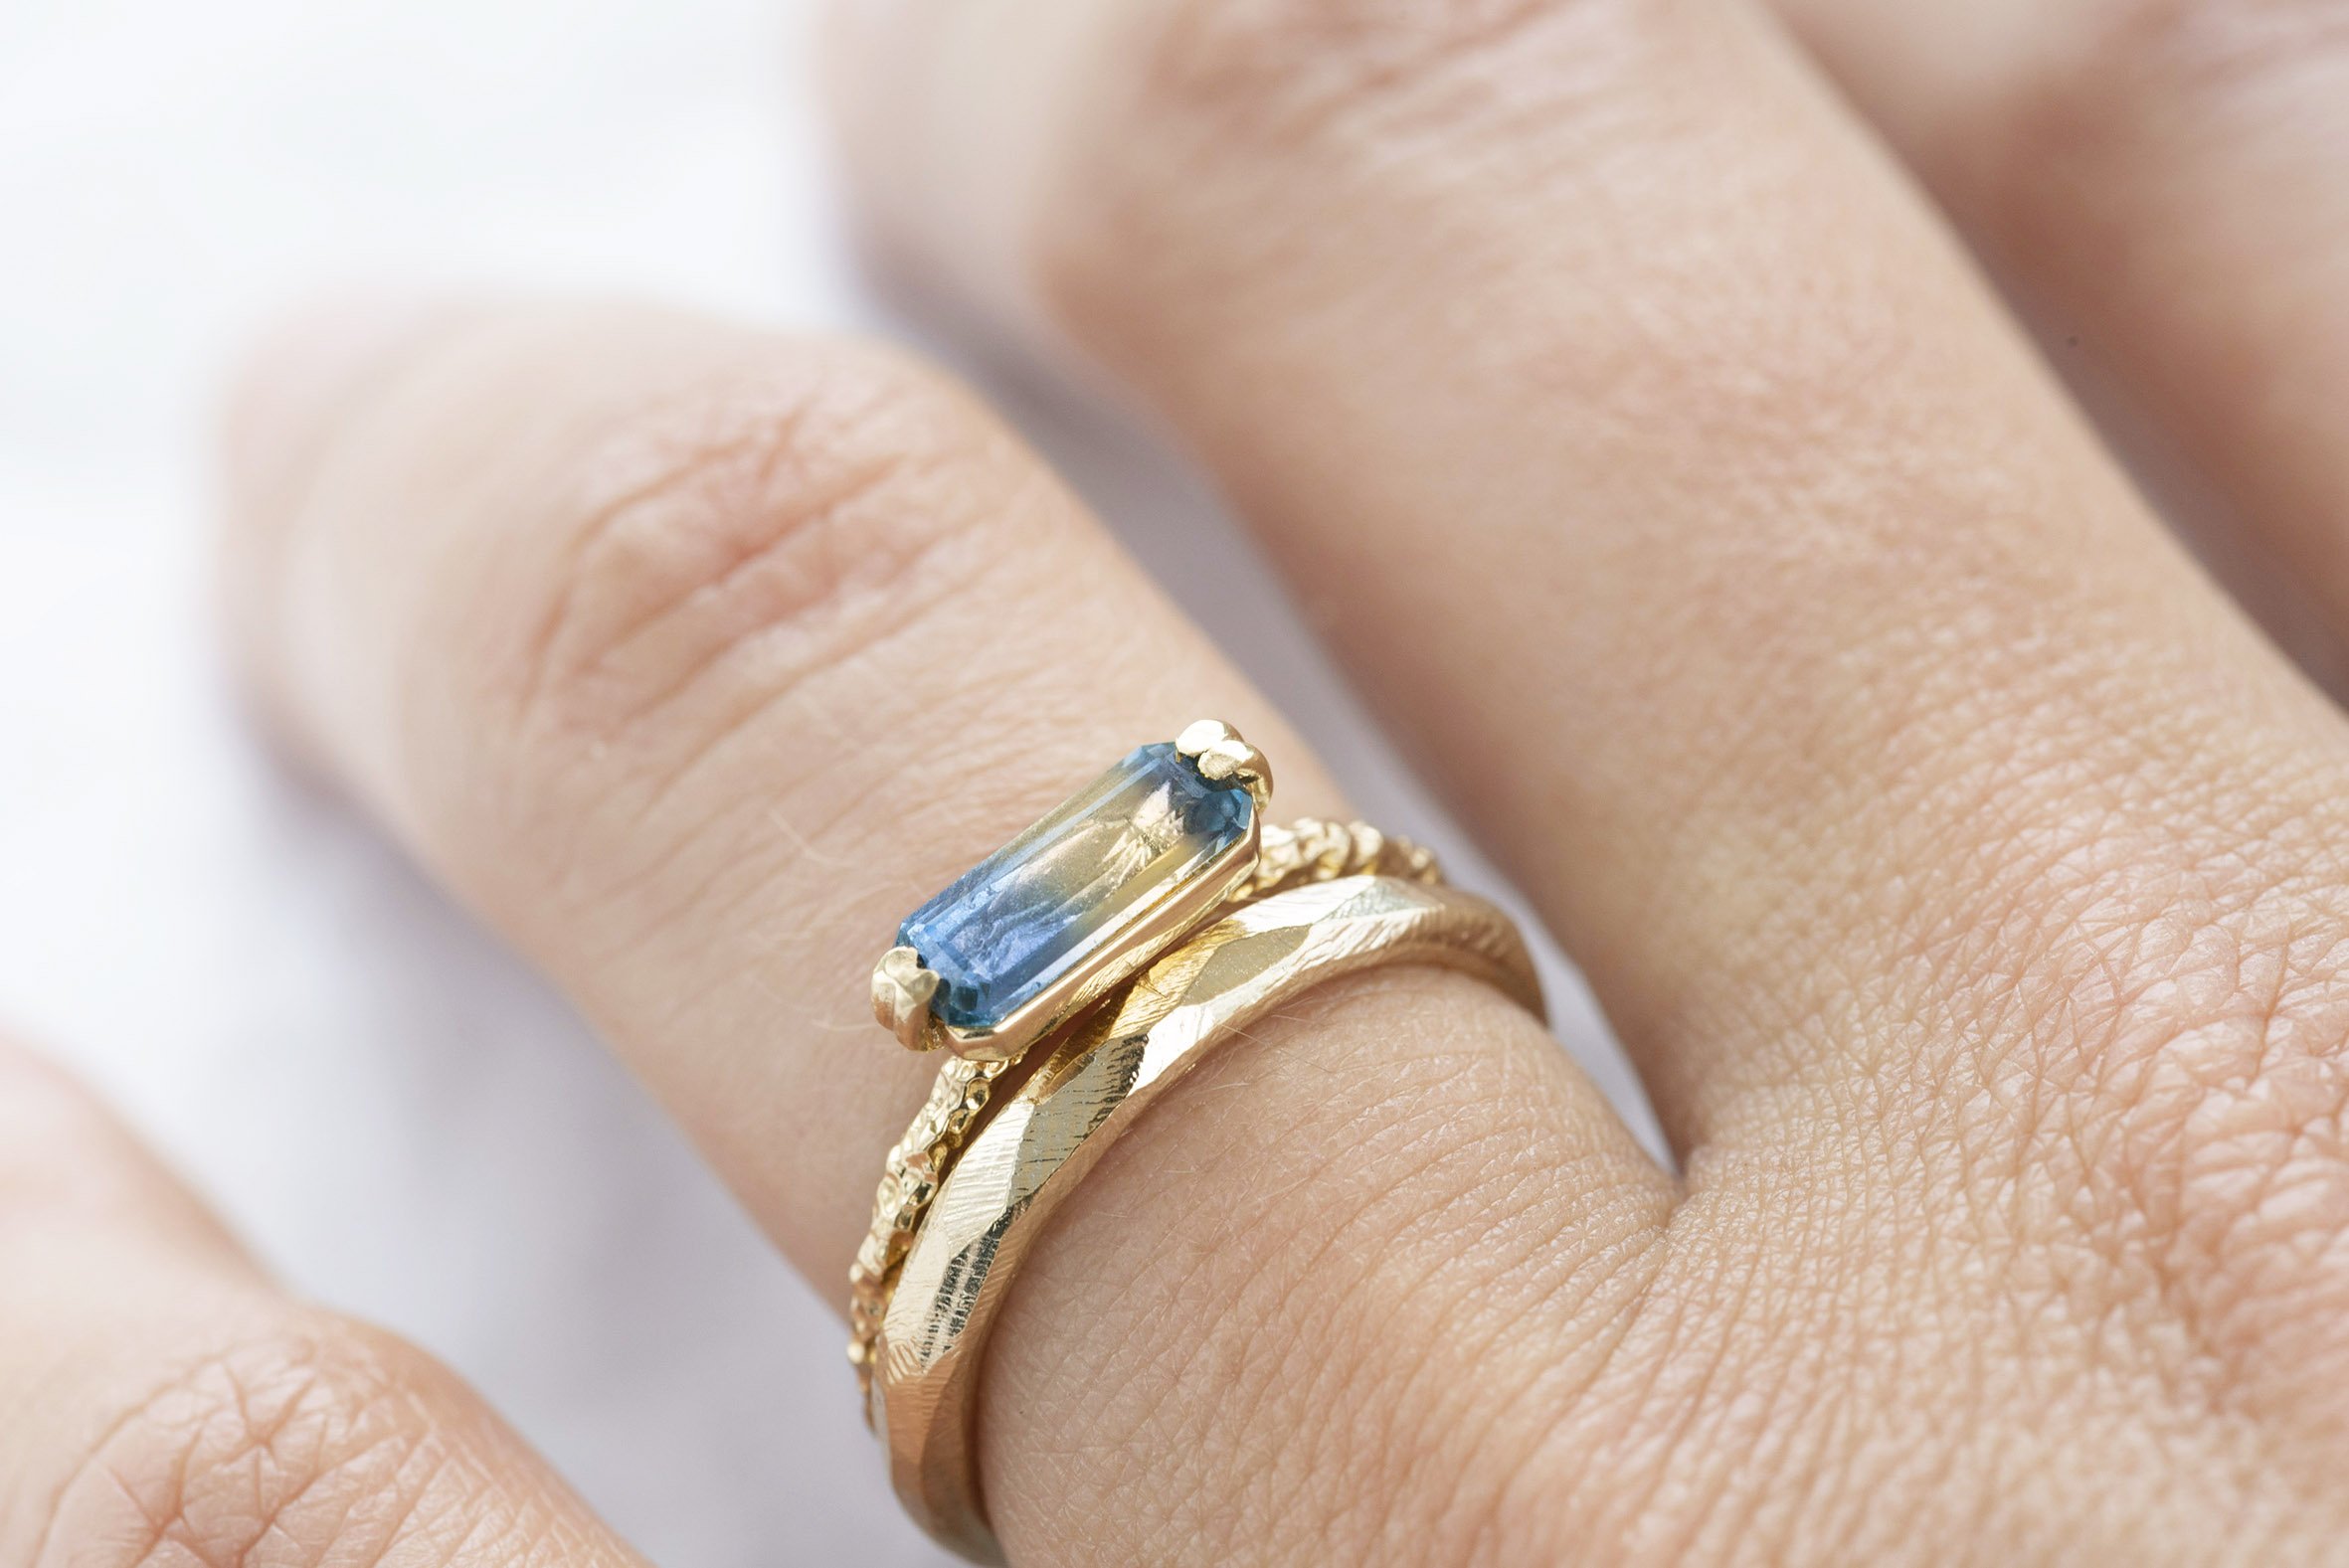  Two wedding rings. A thin gold textured band with modern playful shaped blue stone set in on top and below there is a slim, plain gold band with subtle graphic pattern,  